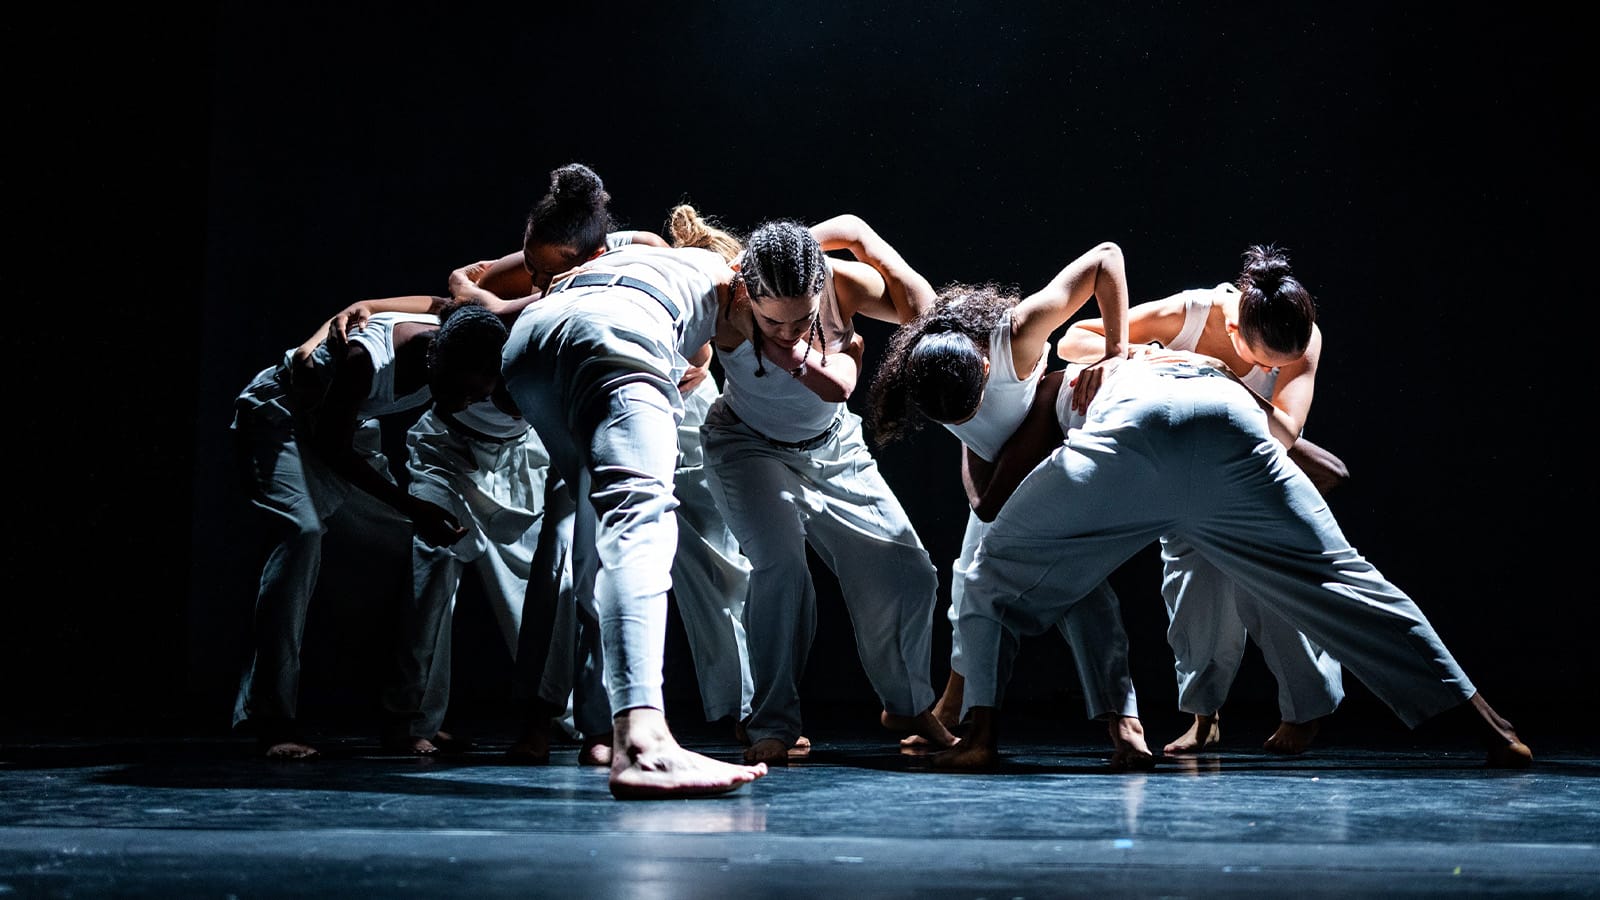 A group of dancers wearing white group their heads and arms together in a circle